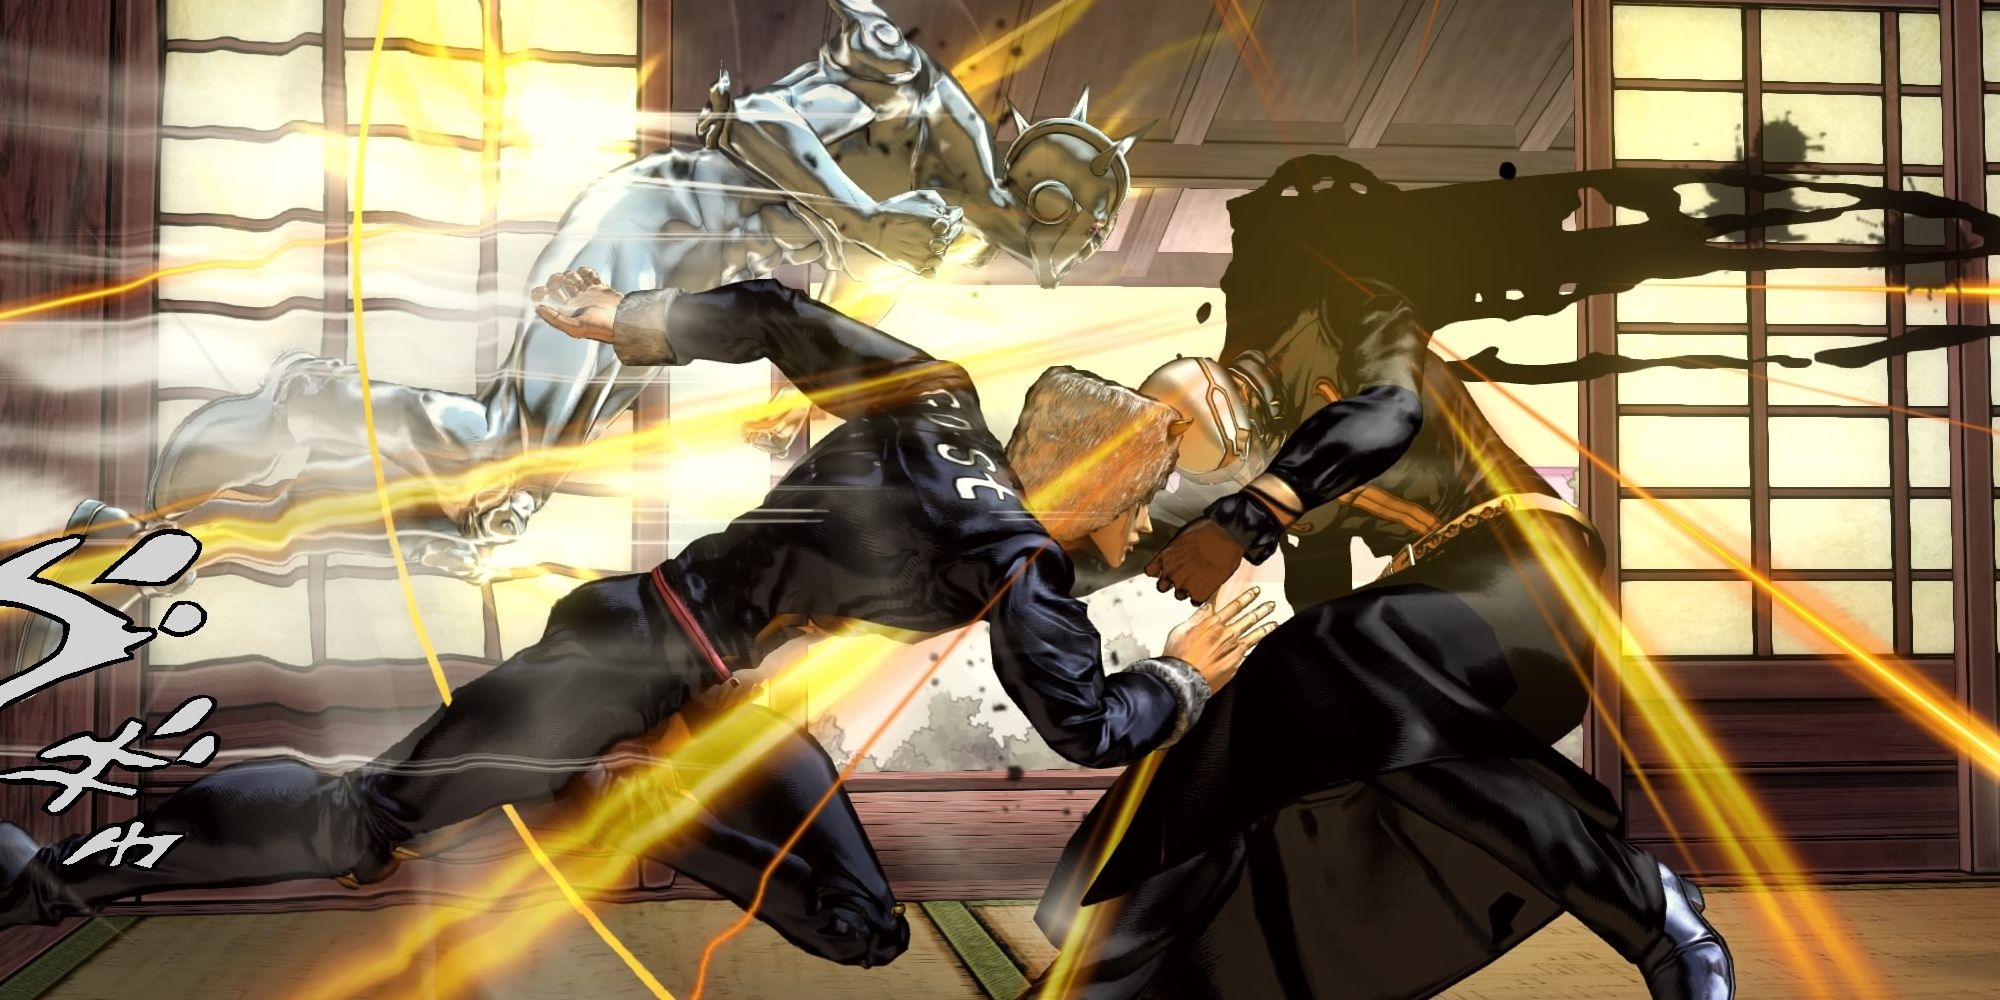 Weather Report tackles Pucci by flying through the air in JoJo's Bizarre Adventure_ All-Star Battle R